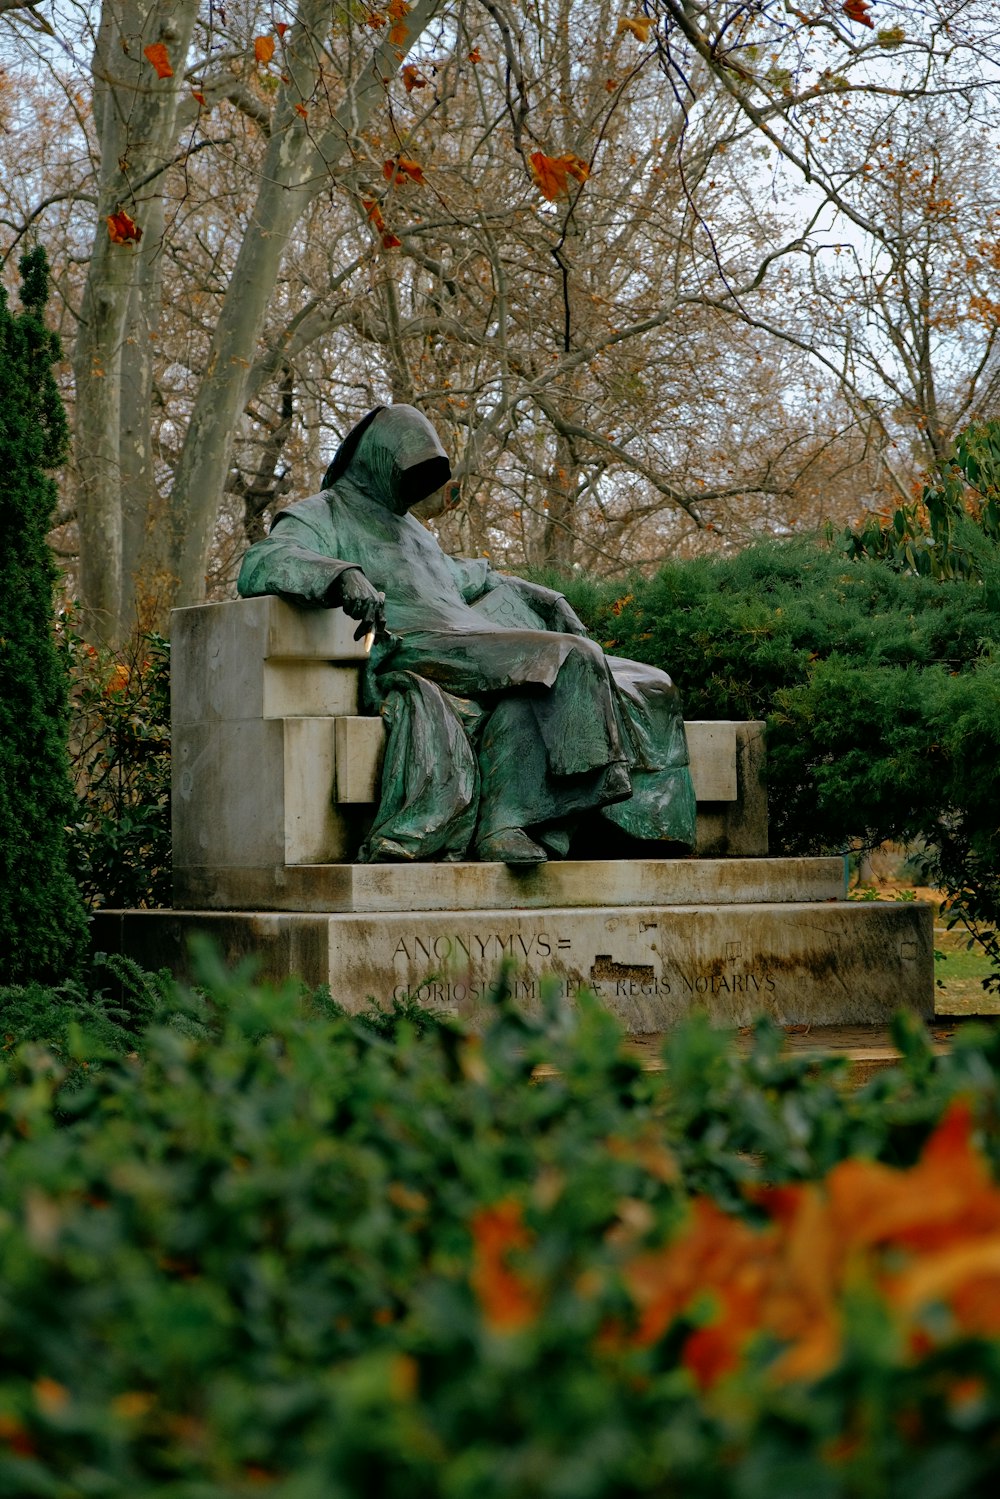 a statue of a person sitting on a bench in a park